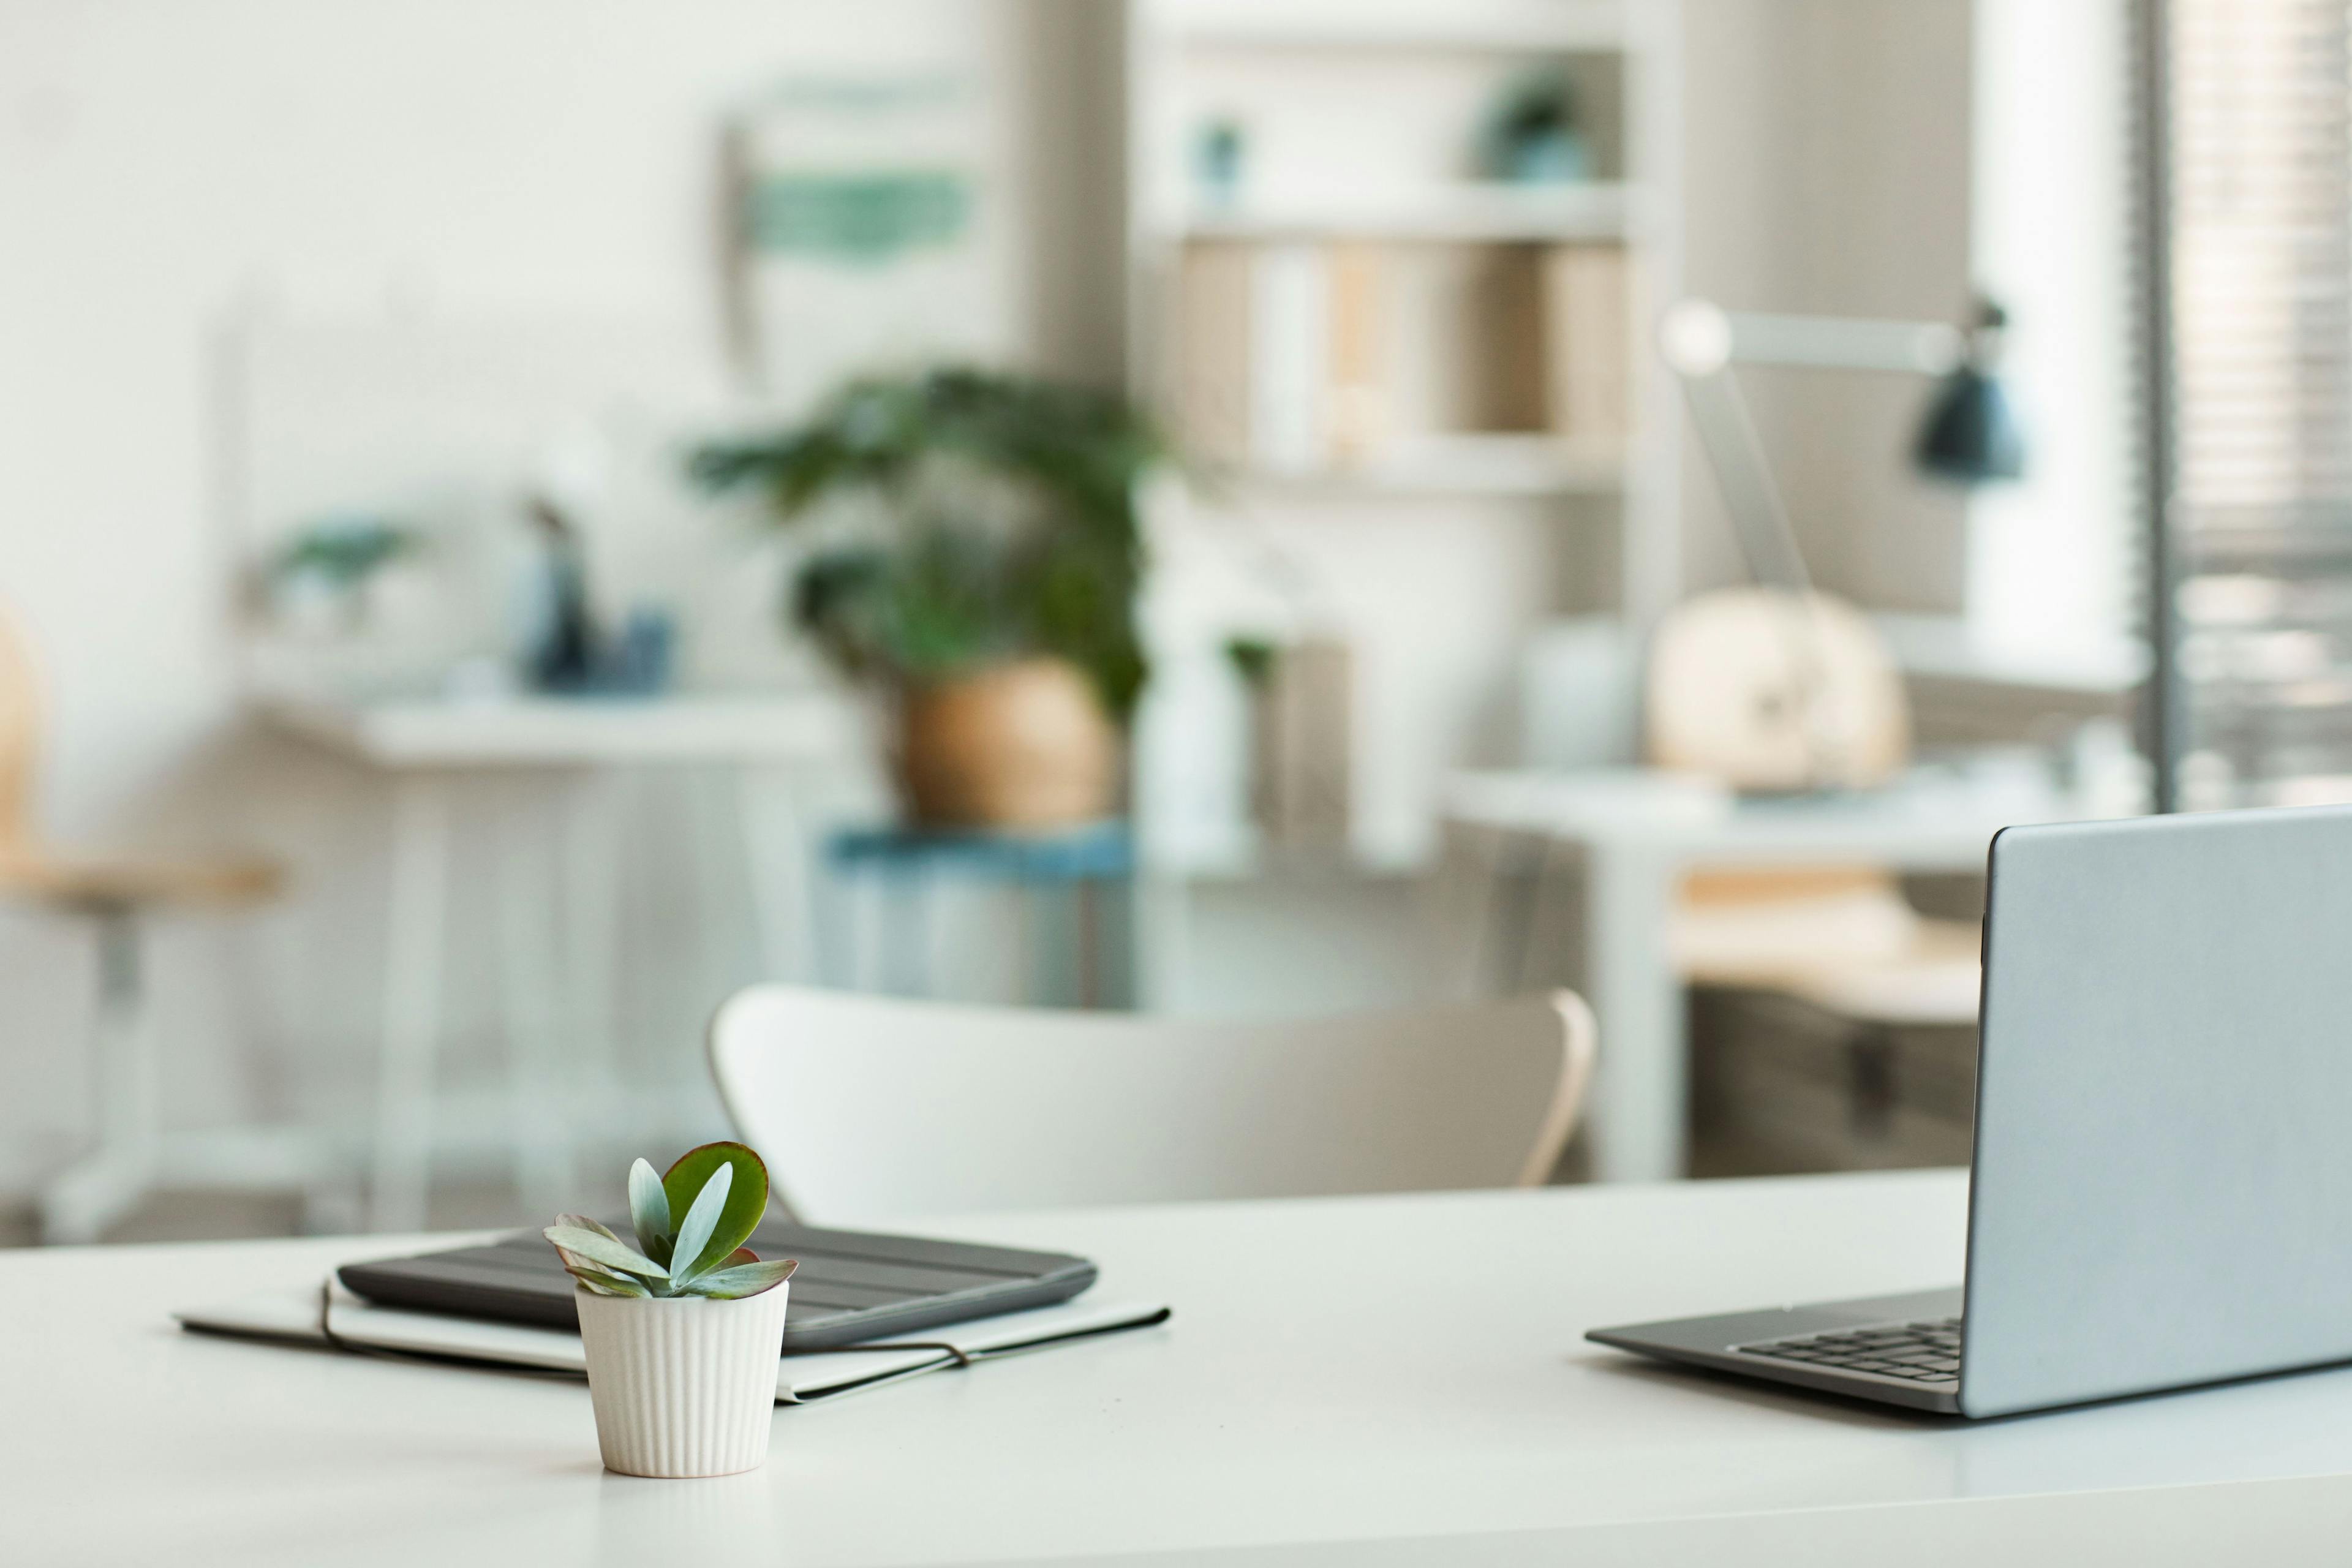 Minimal background image of inviting empty workplace with white desk and succulent plant in foreground, copy space | Image Credit: © Seventyfour - stock.adobe.com.